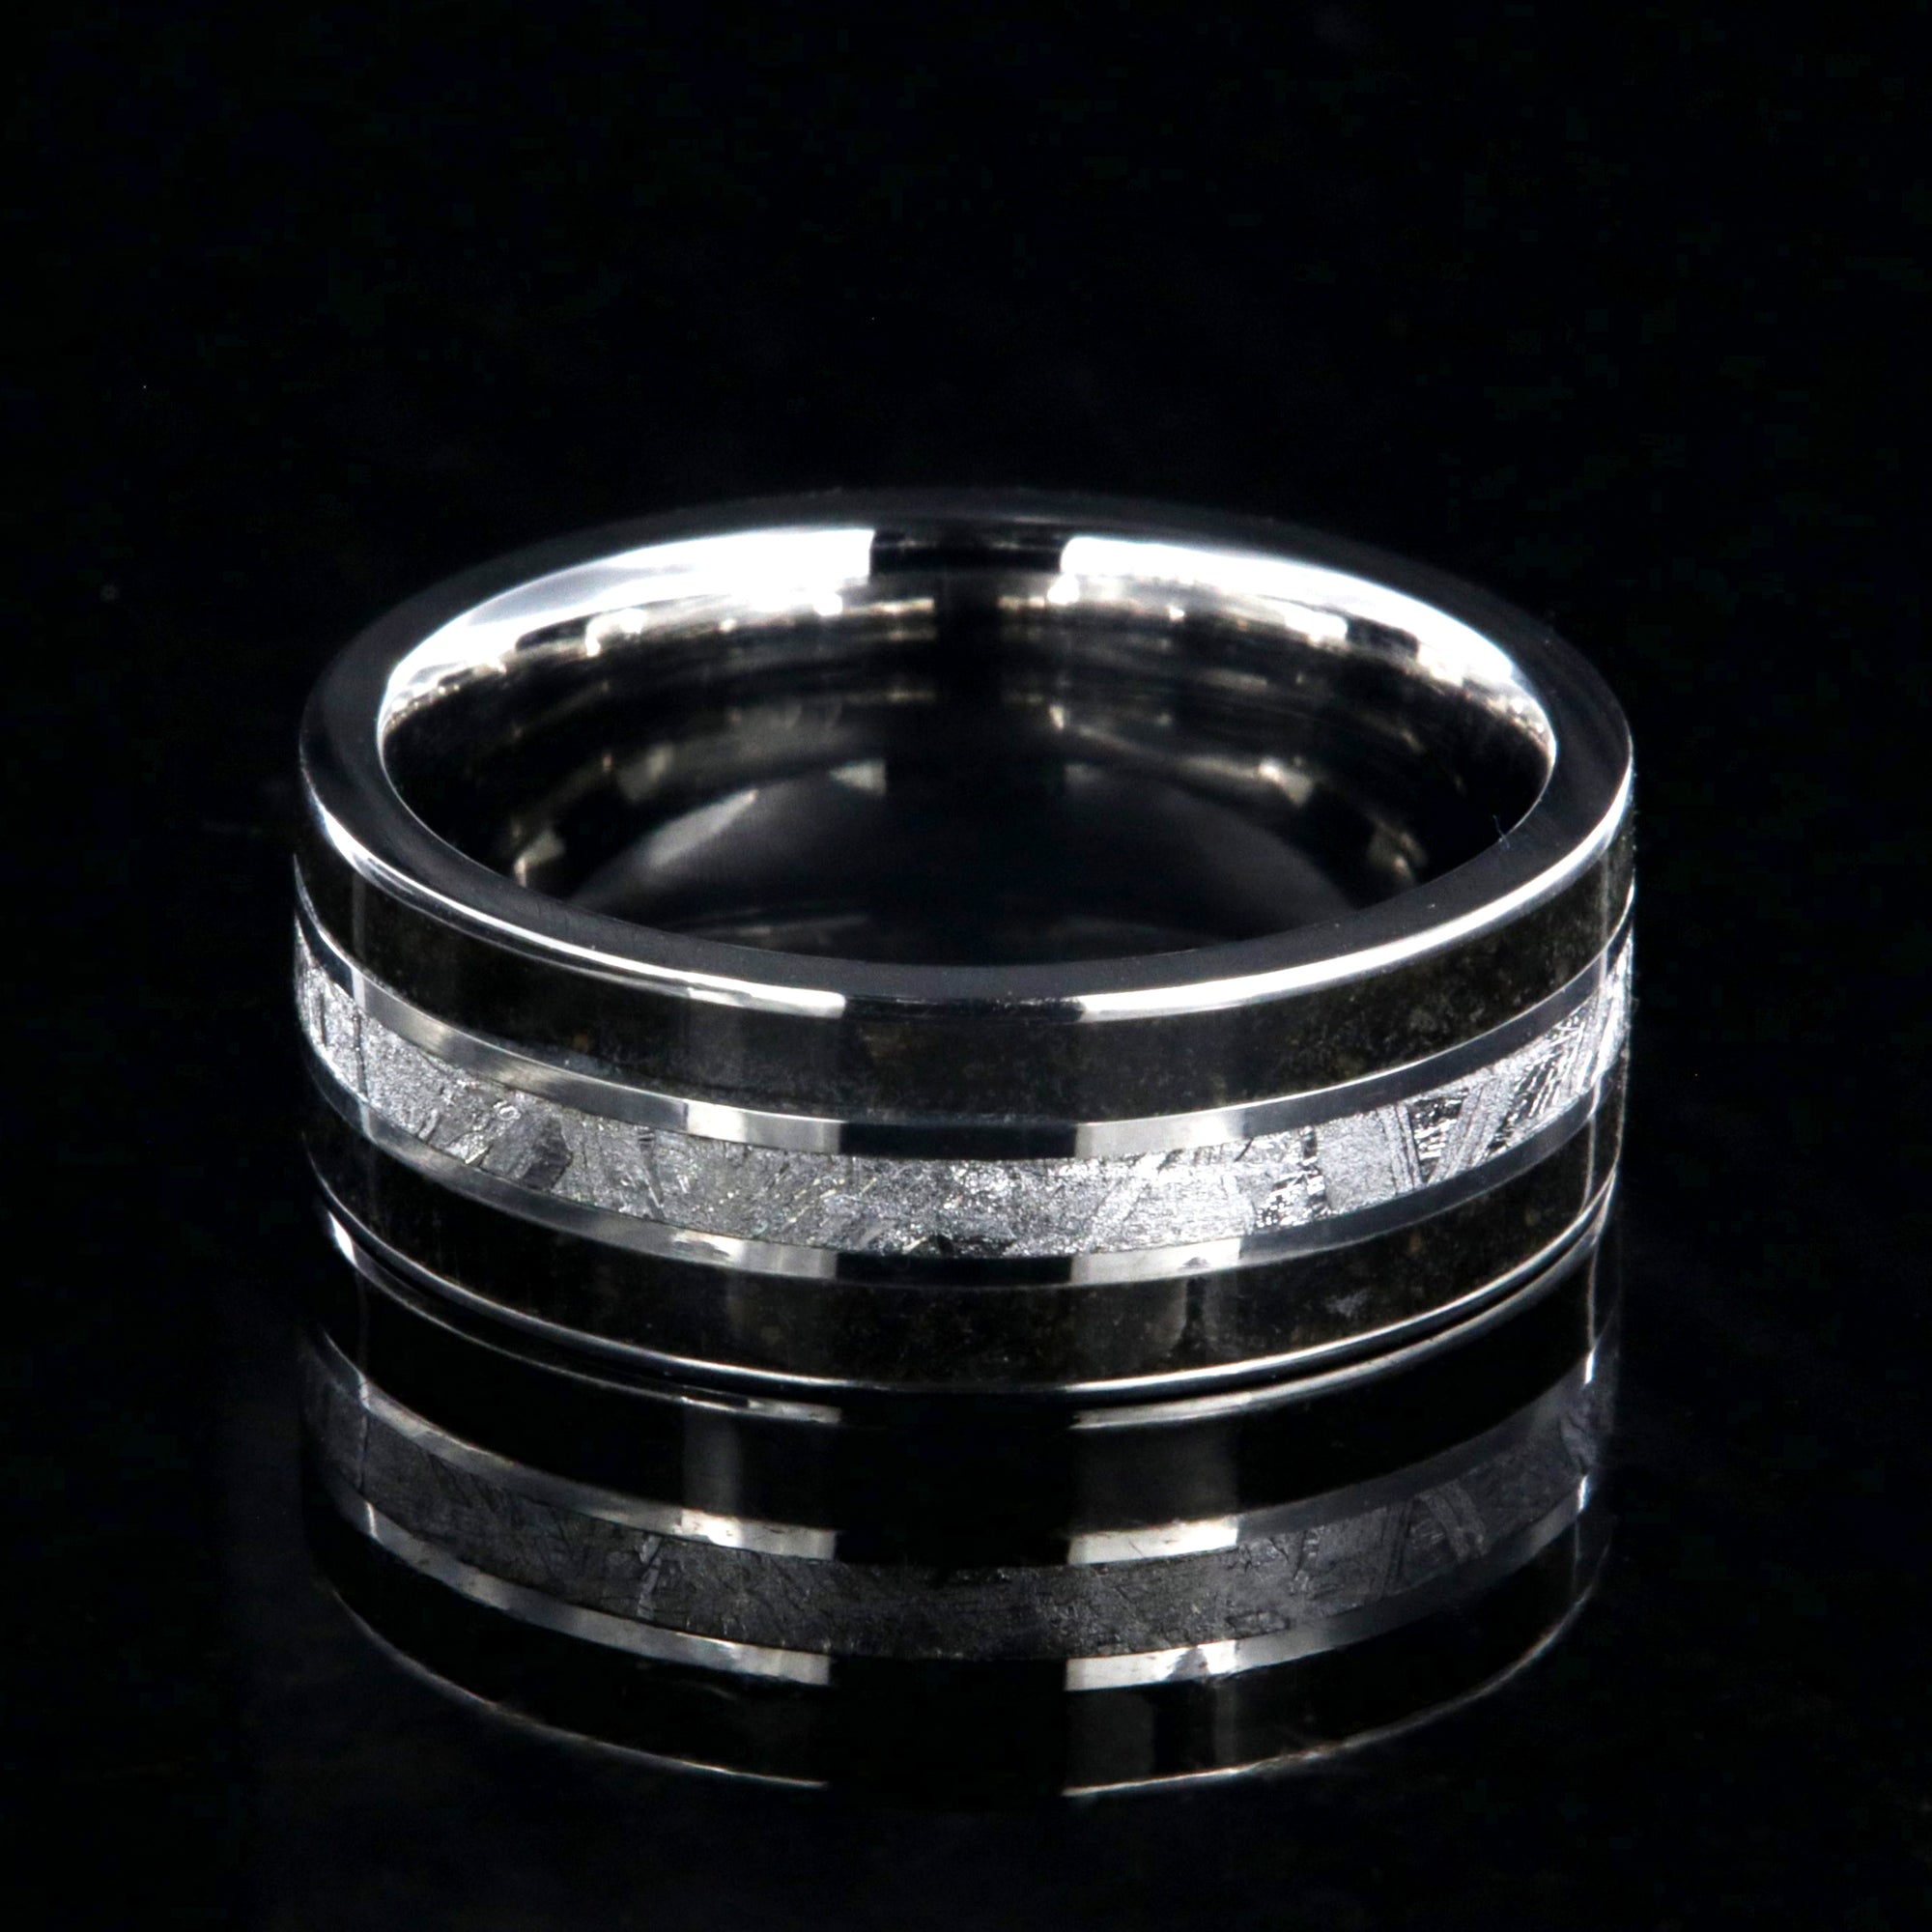 9mm wide men's wedding band with t-rex edges and meteorite center